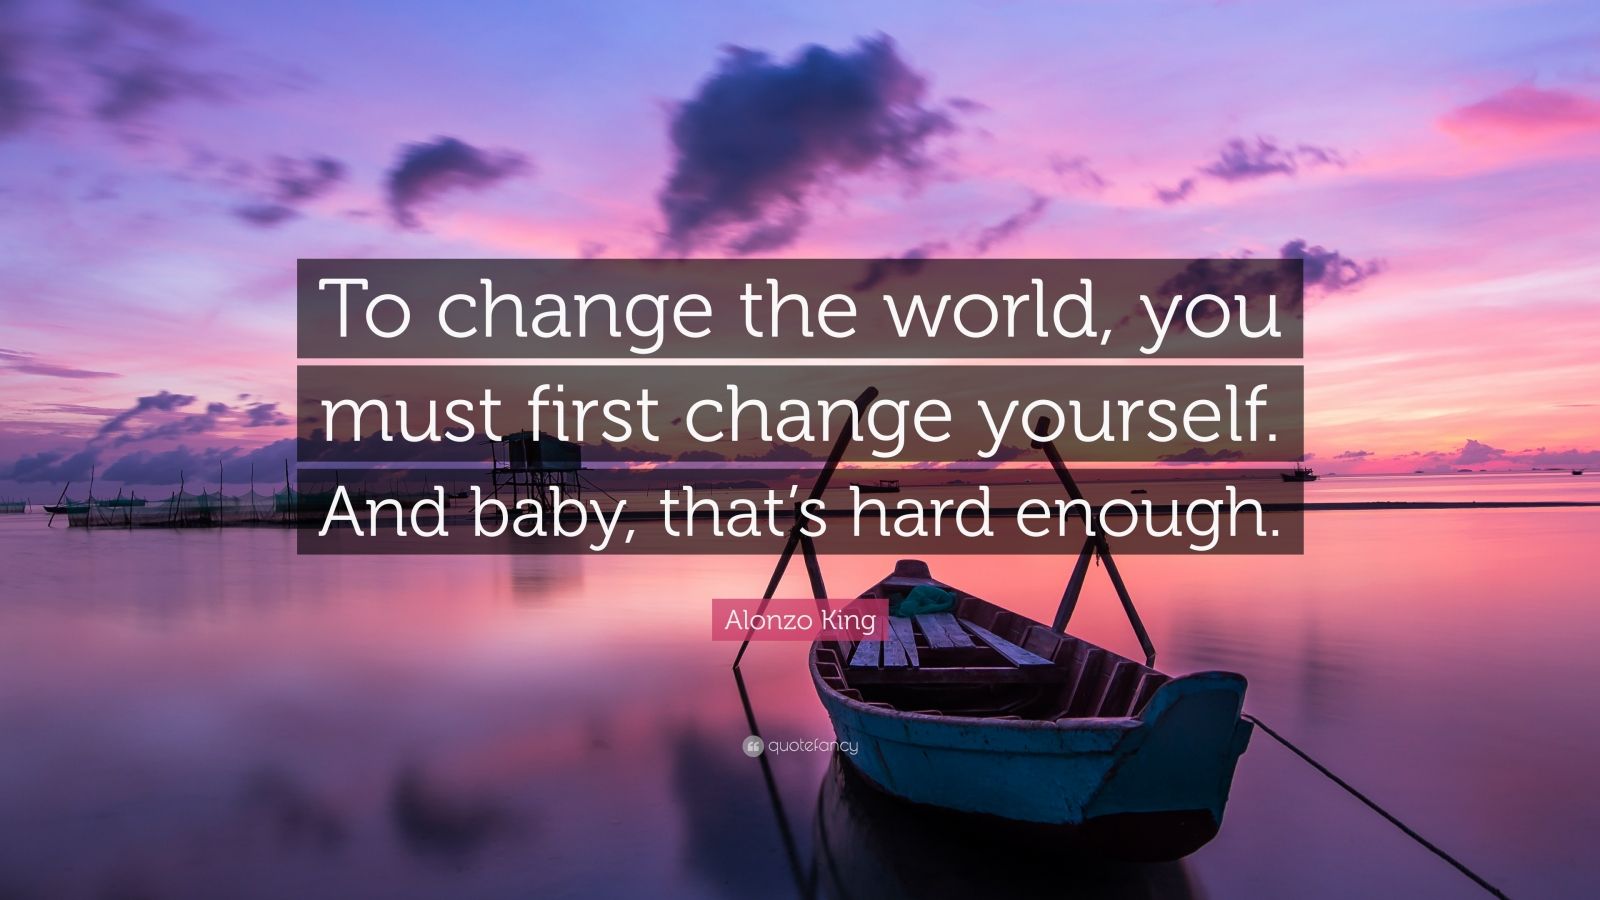 Alonzo King Quote: “To change the world, you must first change yourself ...